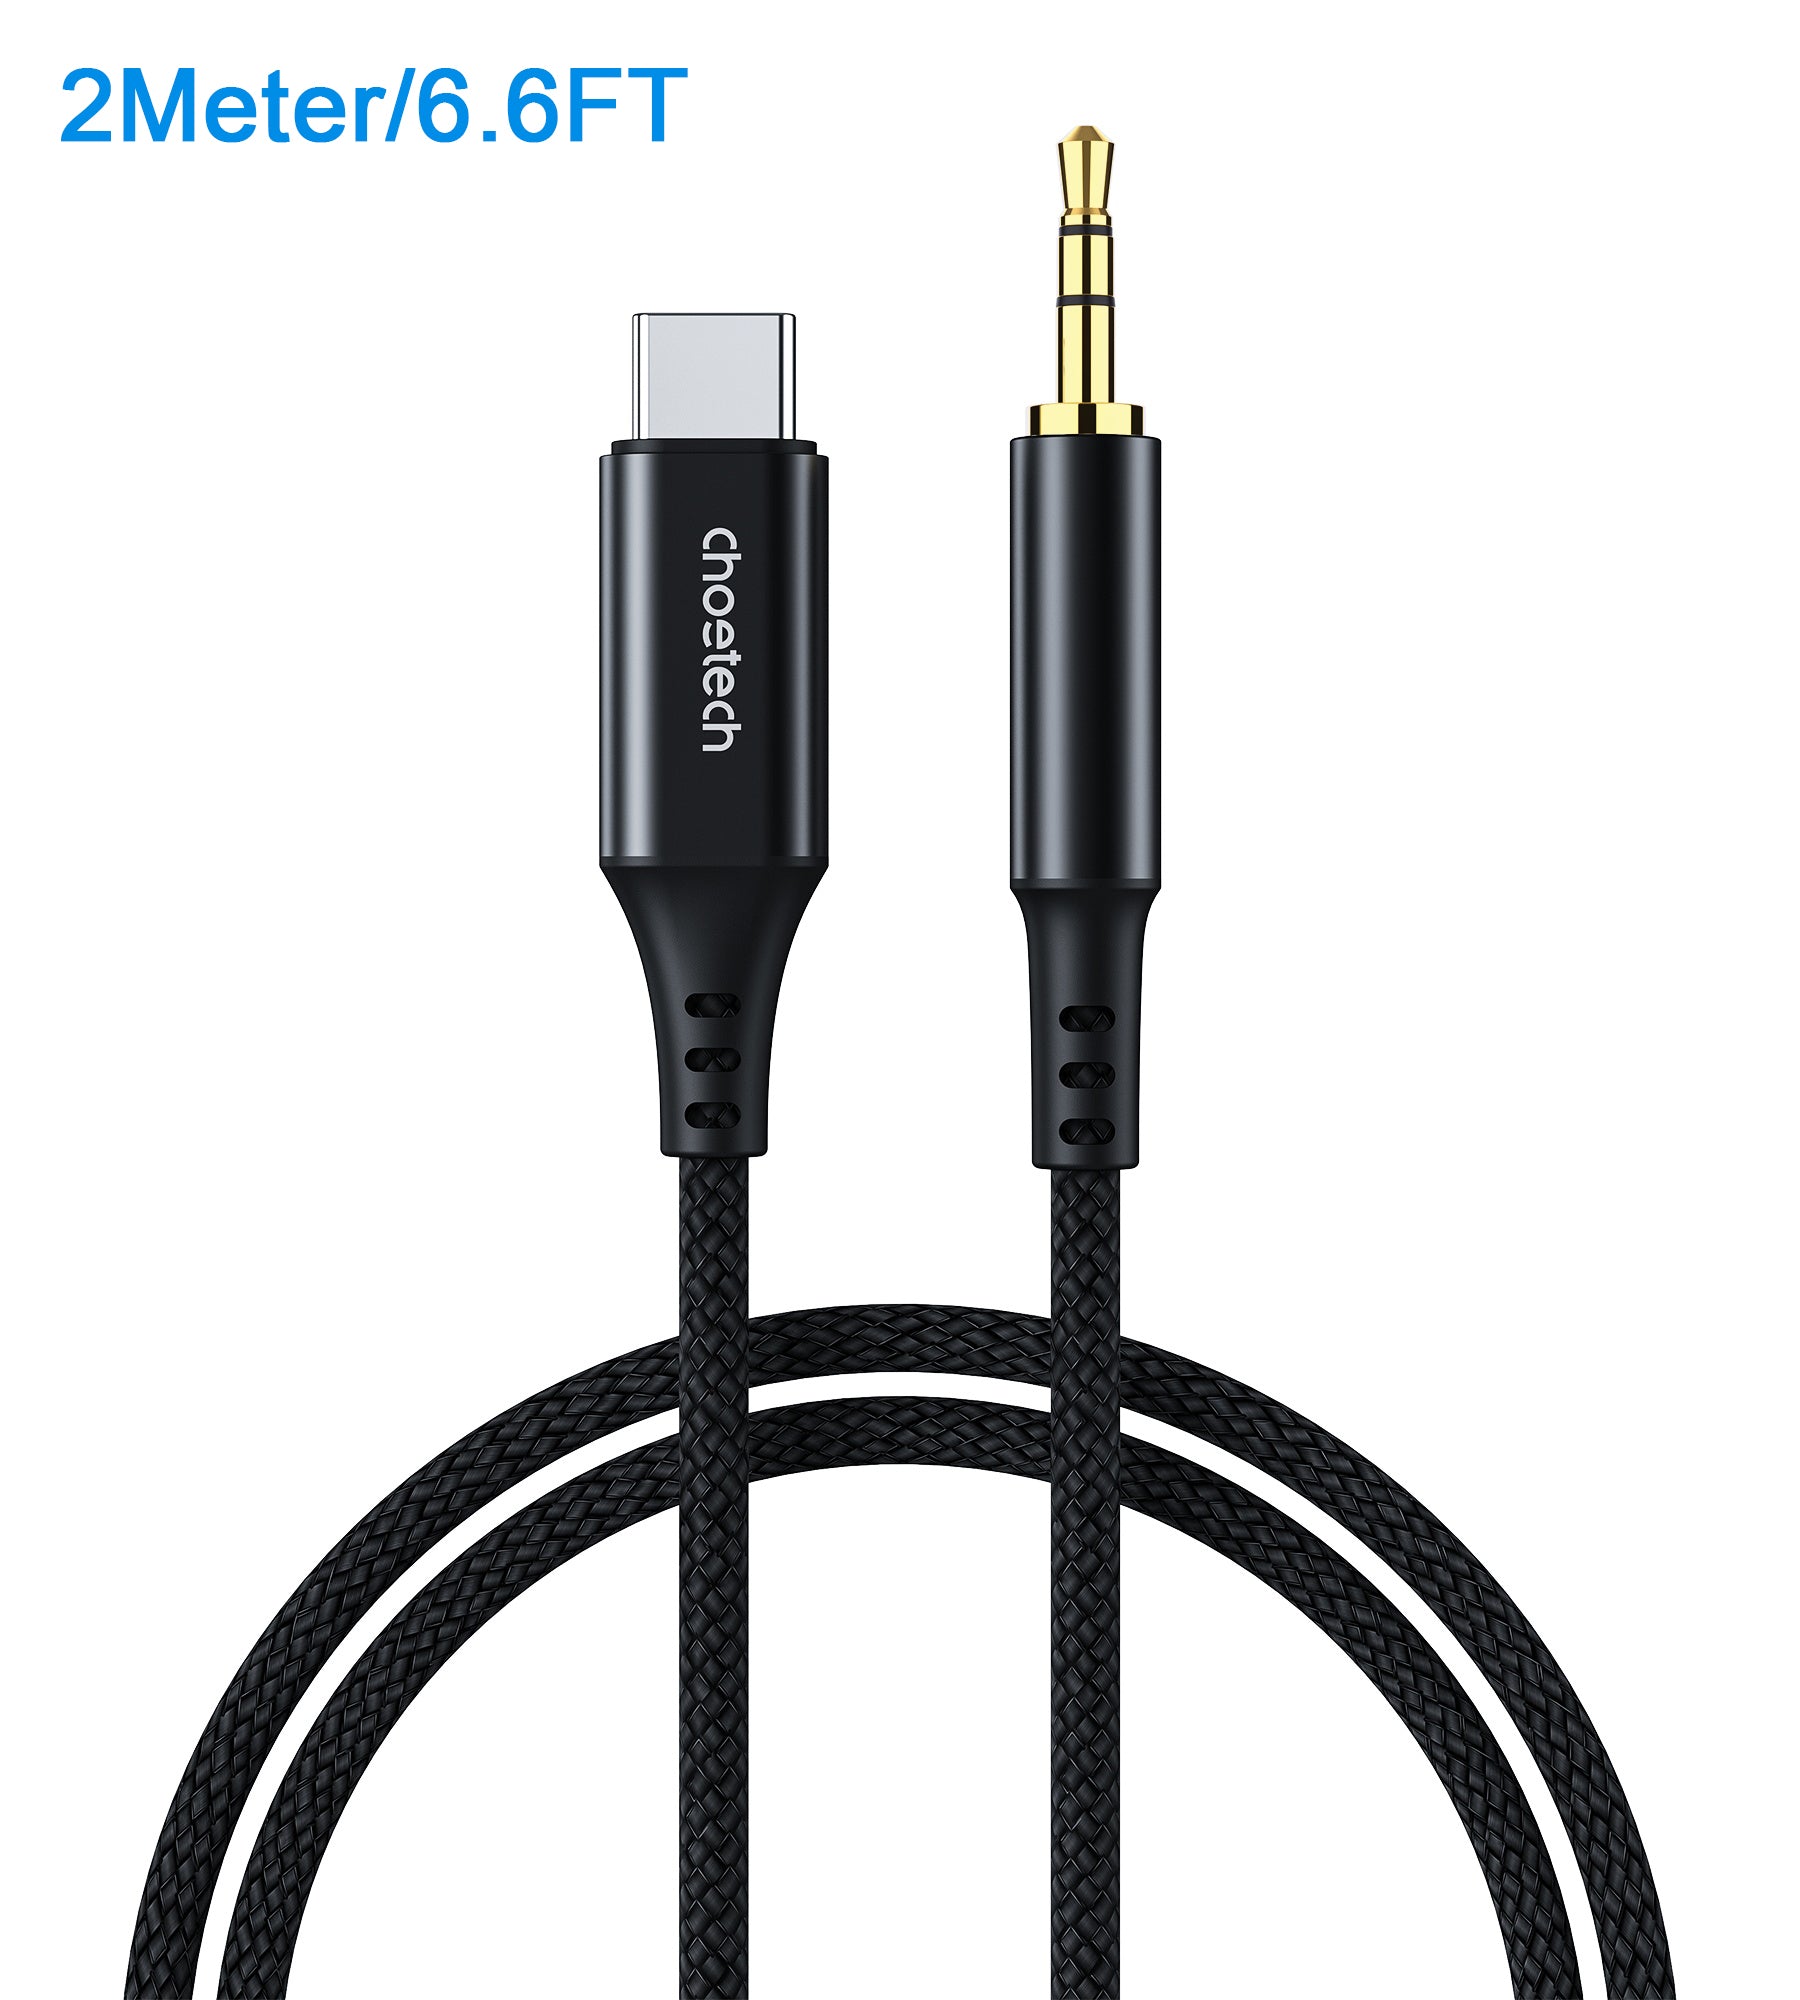 AUX006 Choetech Type-C to 3.5mm Audio Cable